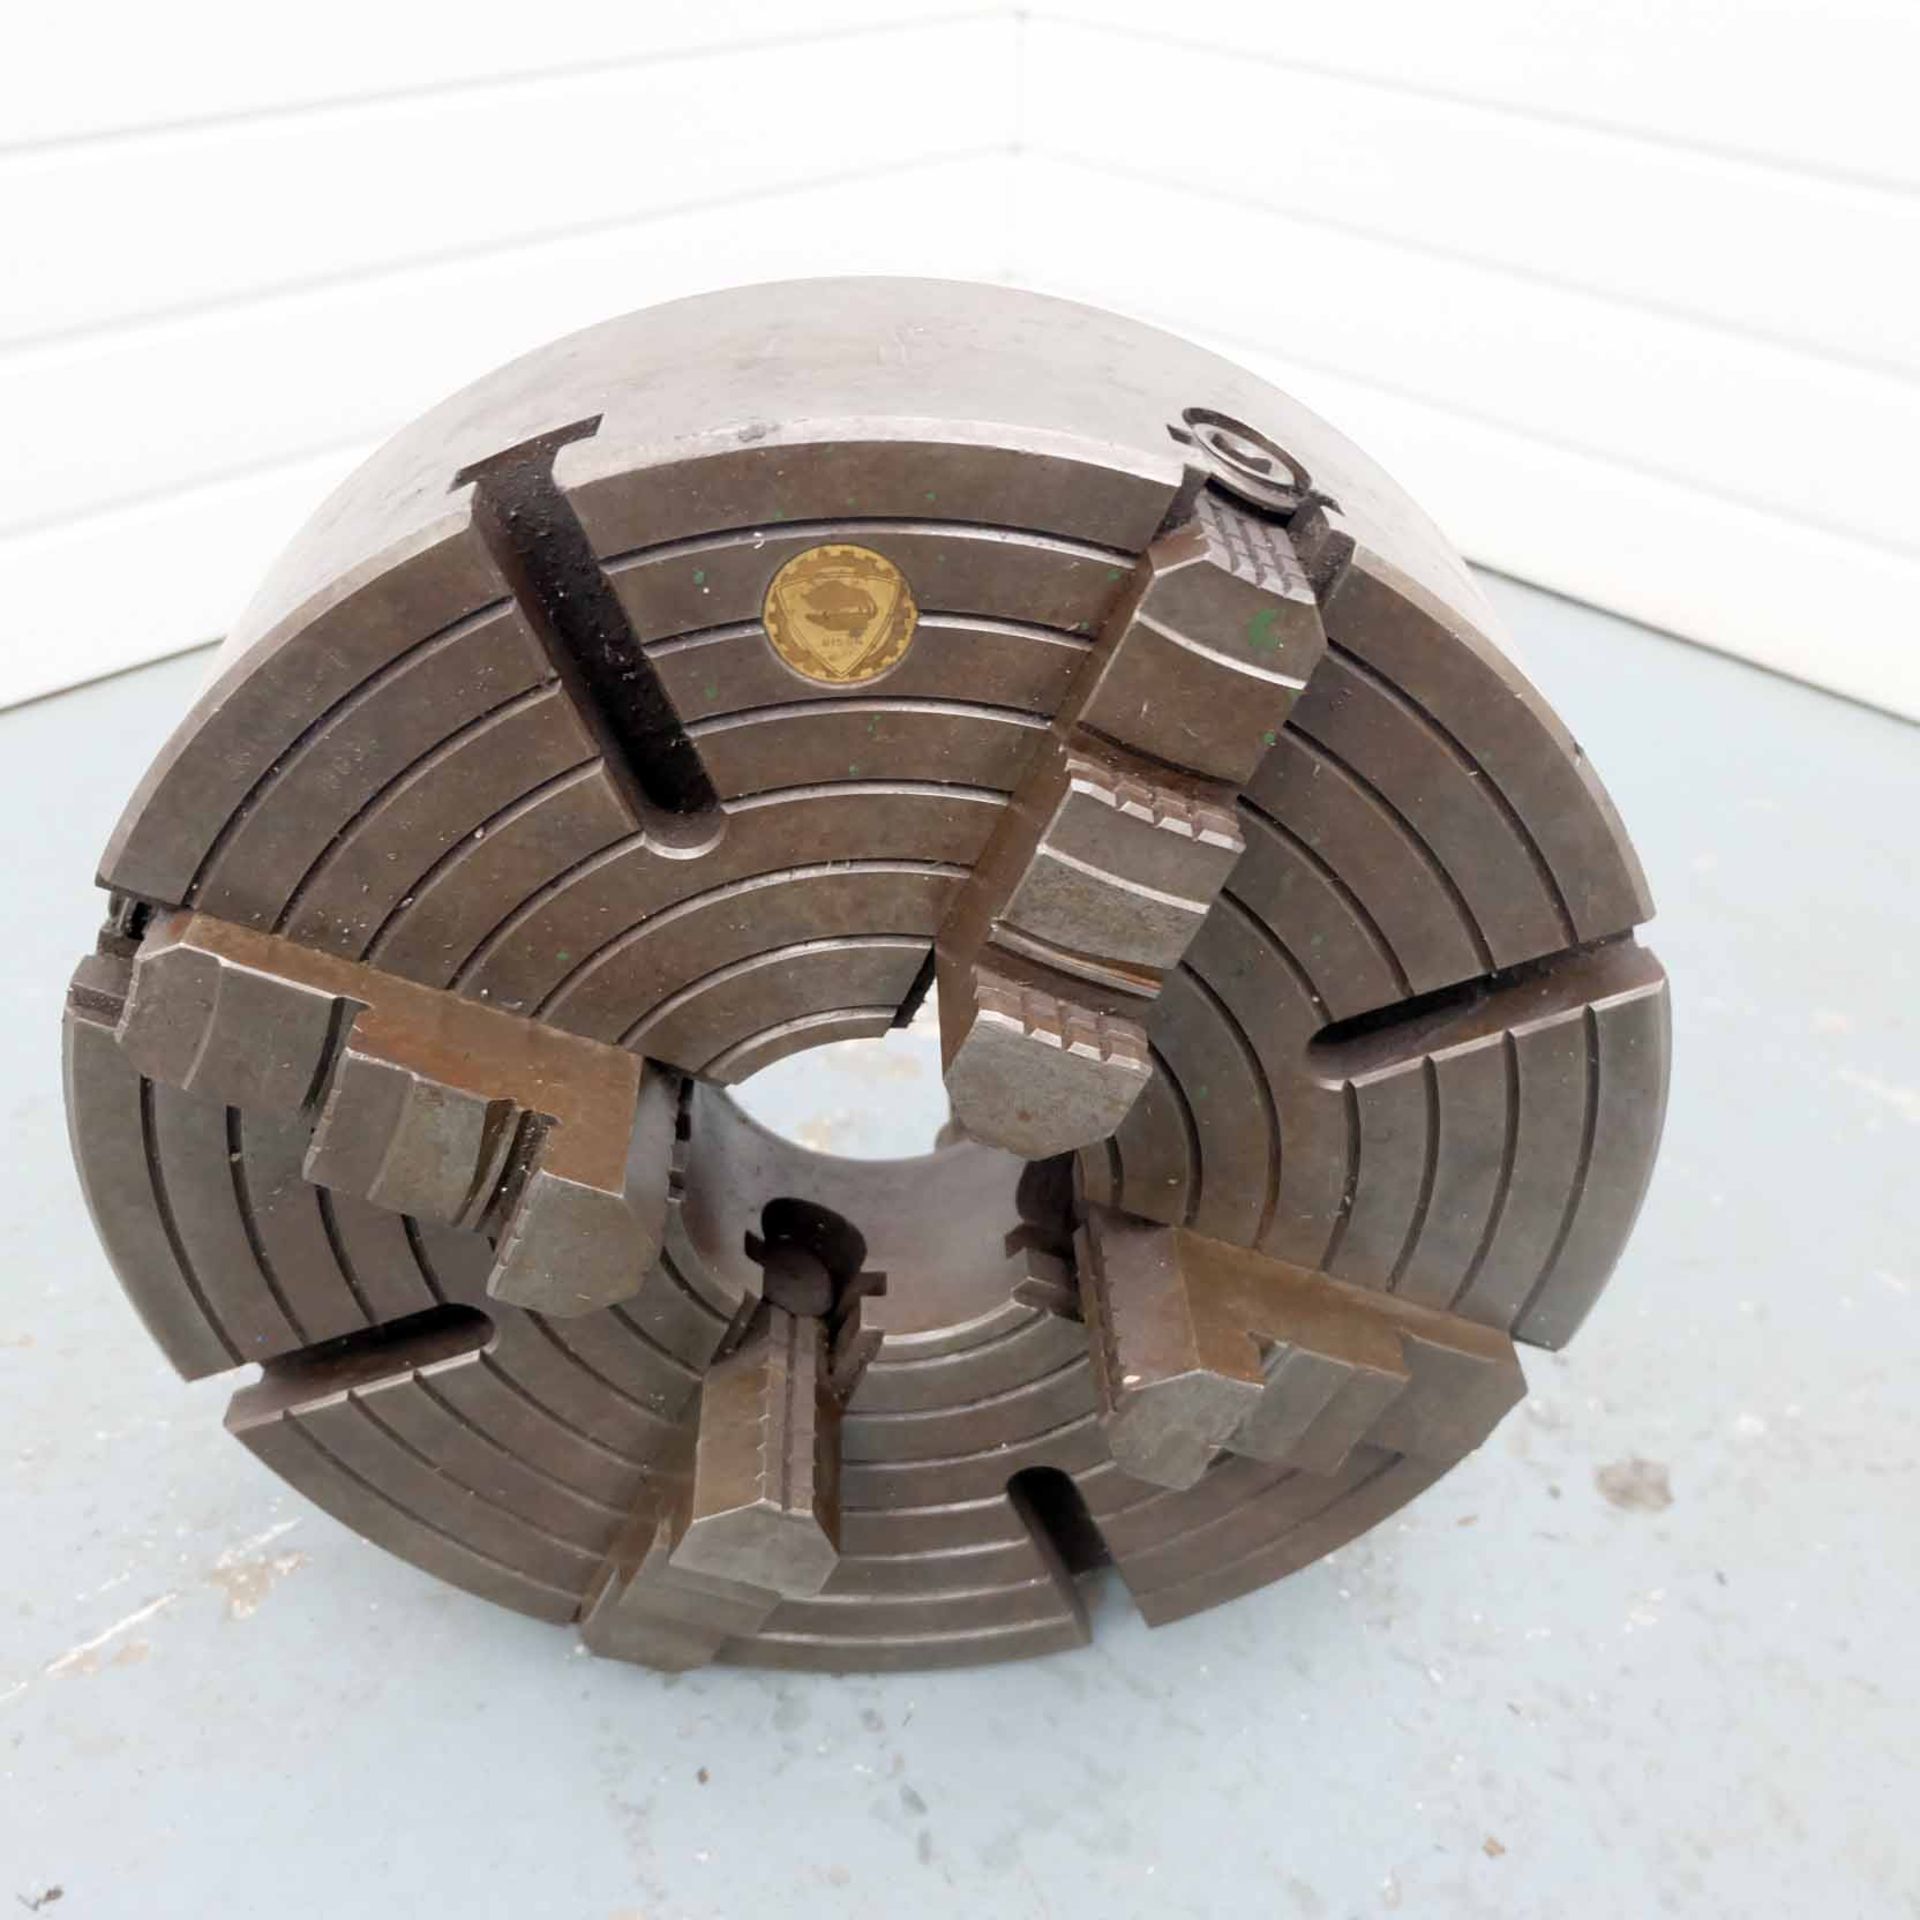 Bison 400mm Diameter Independent Four Jaw Chuck. Fitting 4 Bolts 170mm PCD. Spindle Bore 100mm. - Image 2 of 6